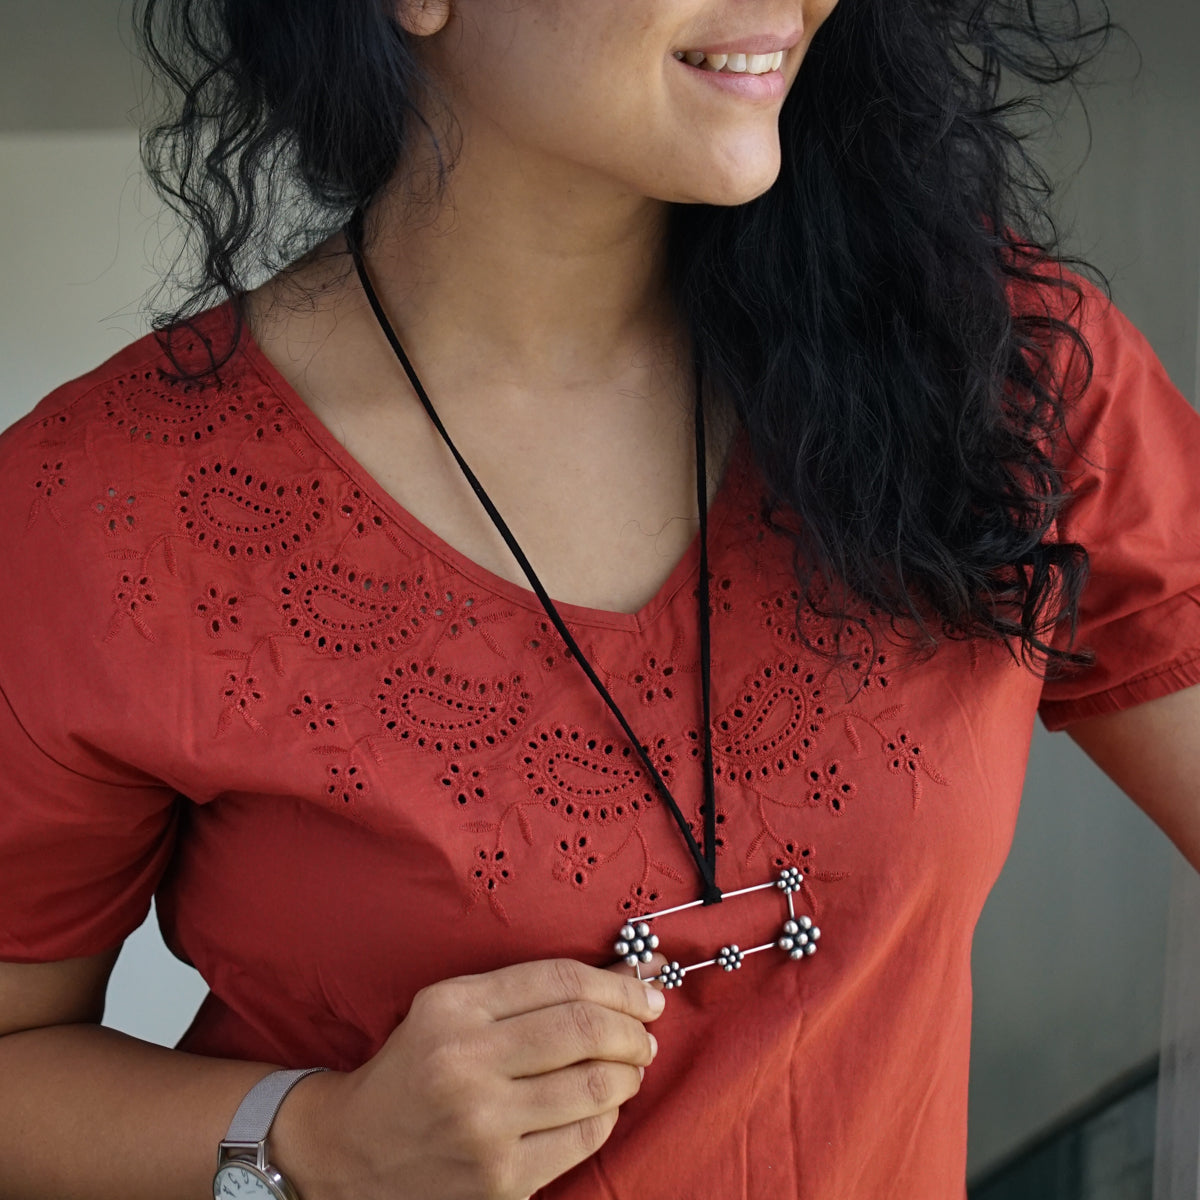 a woman wearing a red shirt and a necklace